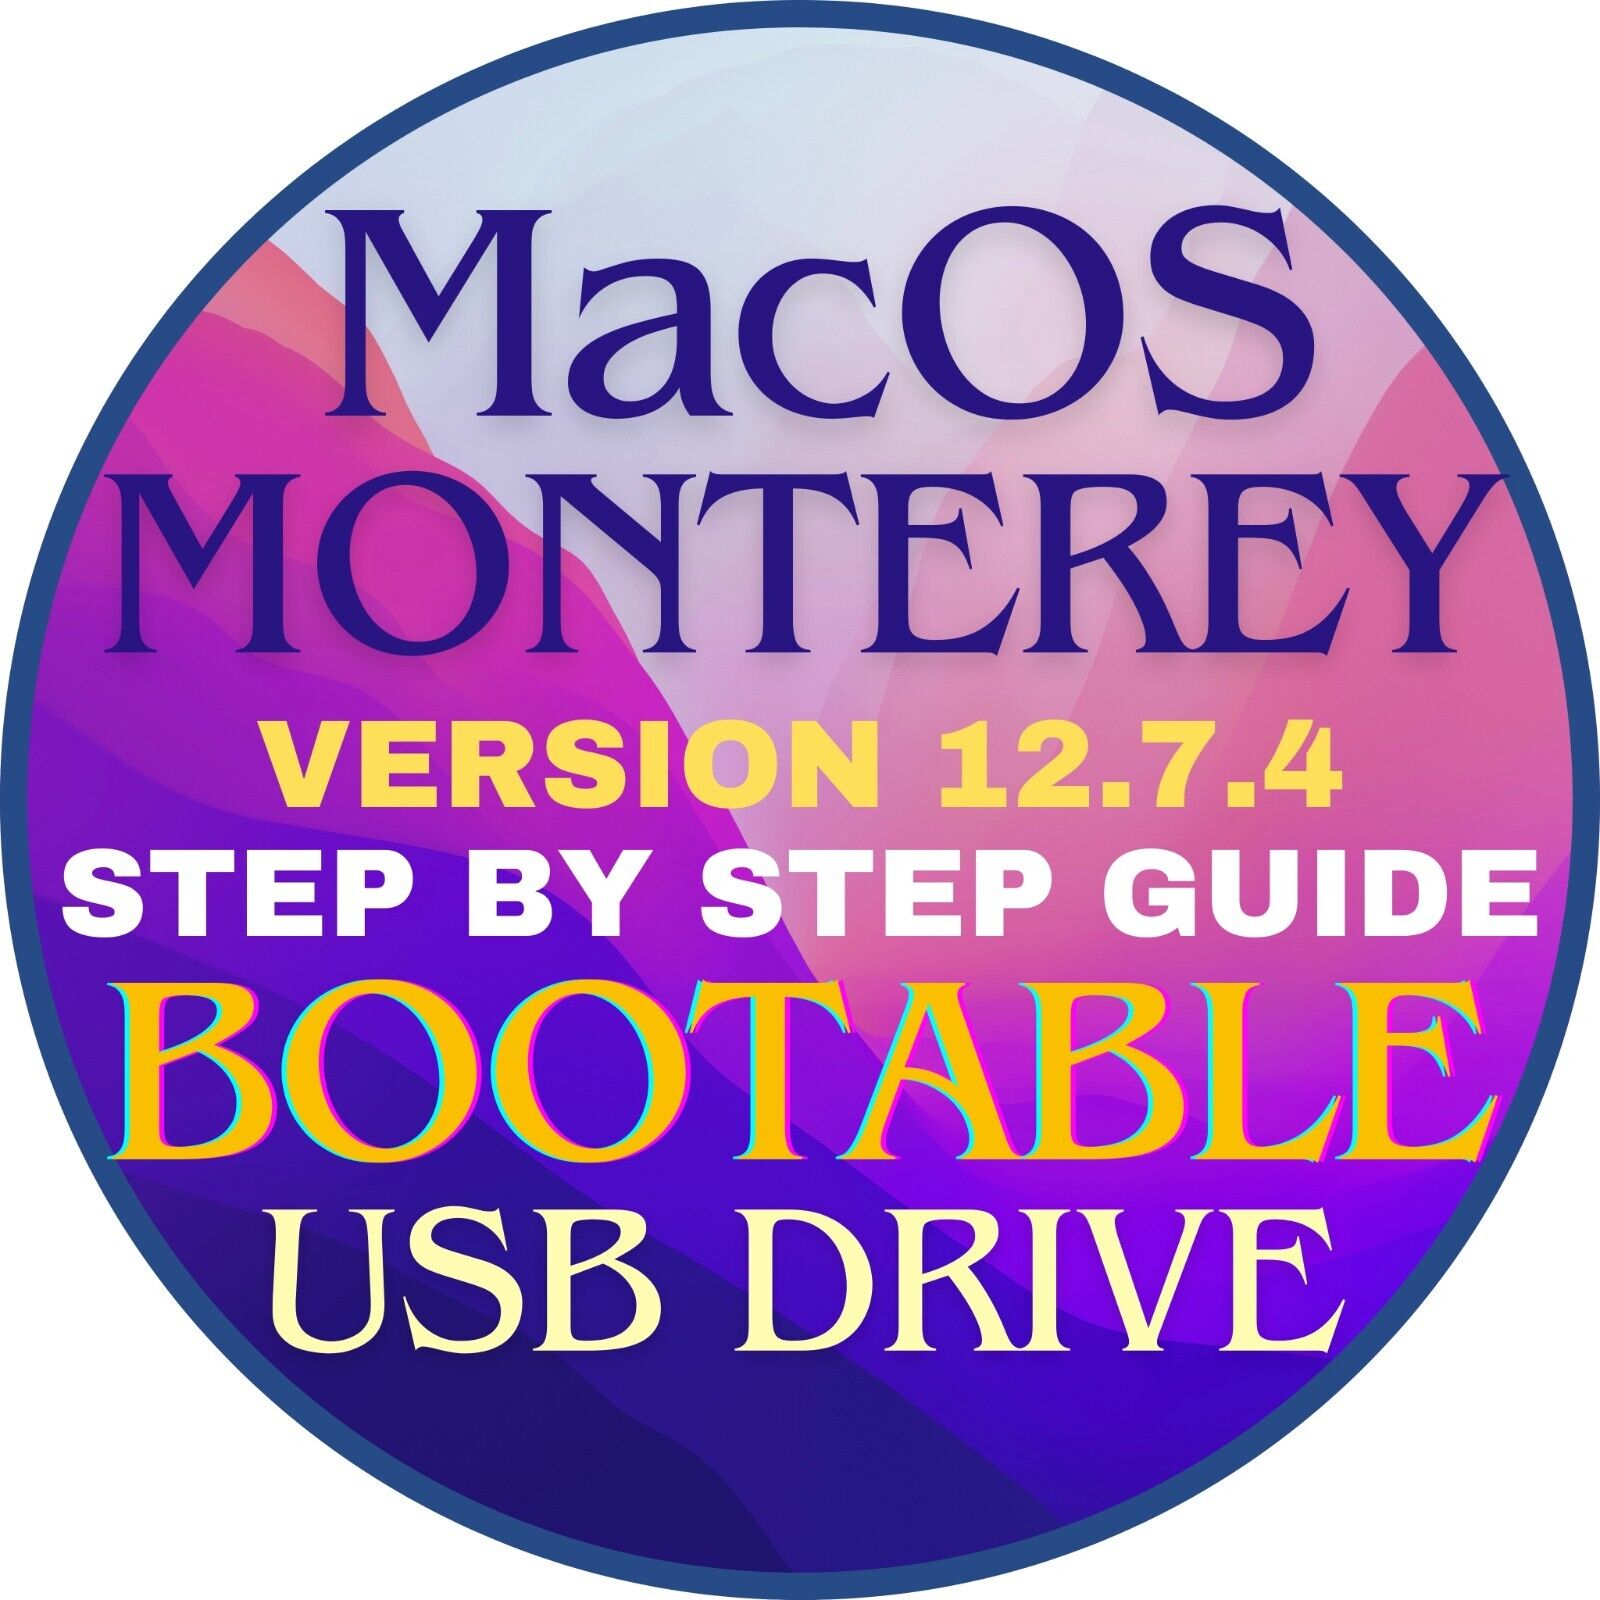 Mac OS MONTEREY Bootable USB Drive, Install, Repair, Instructions, Fast Shipping